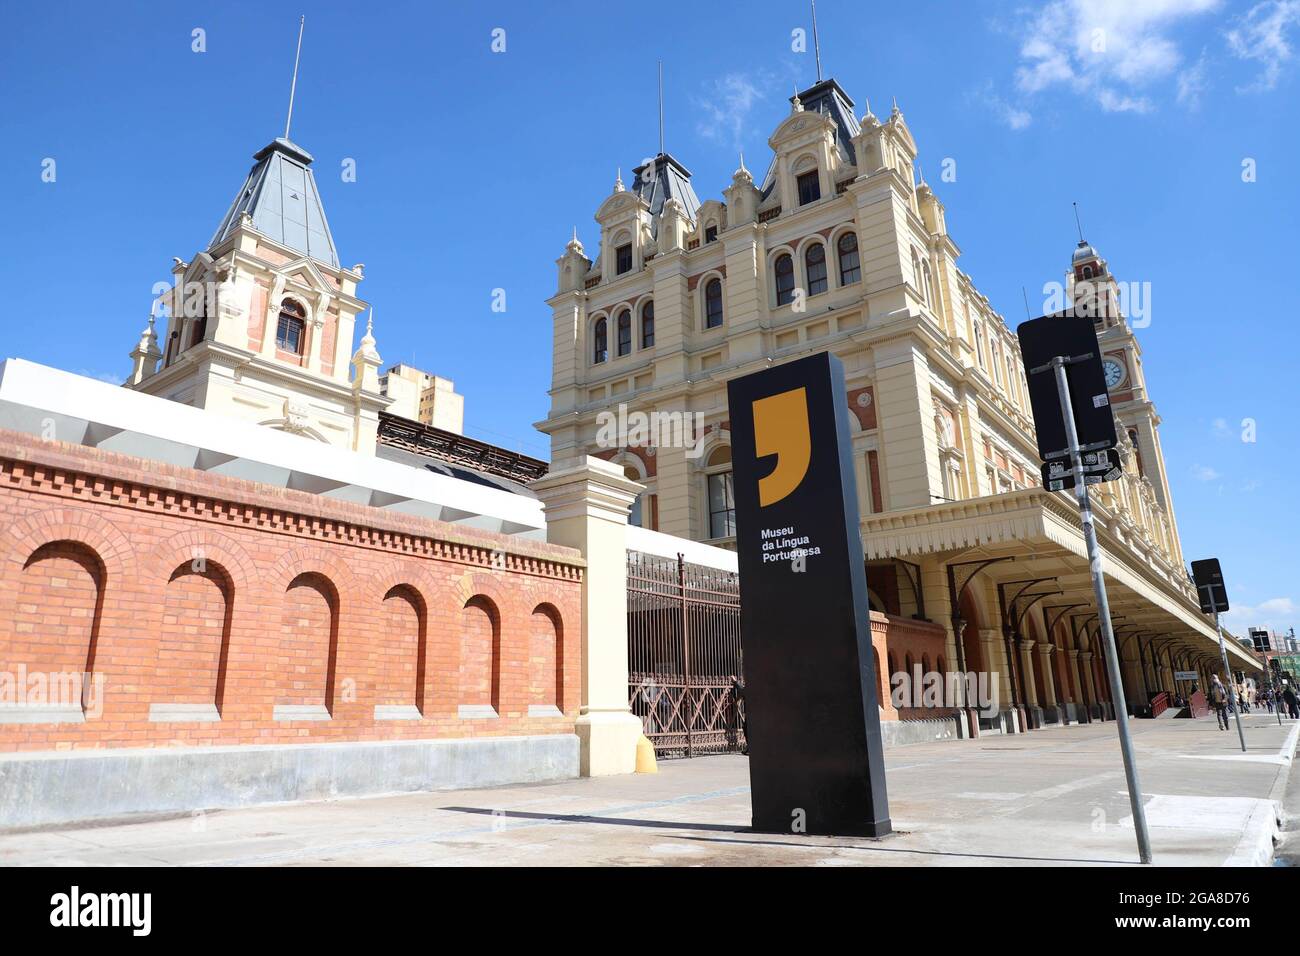 July 29, 2021, Sao Paulo, Sao Paulo, Brasil: (INT) Governor of Sao Paulo delivers the reconstructed museum of Portuguese language. July 29, 2021, Sao Paulo, Brazil: The governor of Sao Paulo, Joao Doria, delivers the reconstructed Museum of Portuguese Language, during a press conference in Sao Paulo. Doria said the reopening will take place on Saturday, 31, with the presence of invited authorities. The museum is reopened after renovations and modernizations, which include the expansion of the space and the creation of a terrace. On December 21, 2015, a fire consumed two floors of the historic Stock Photo